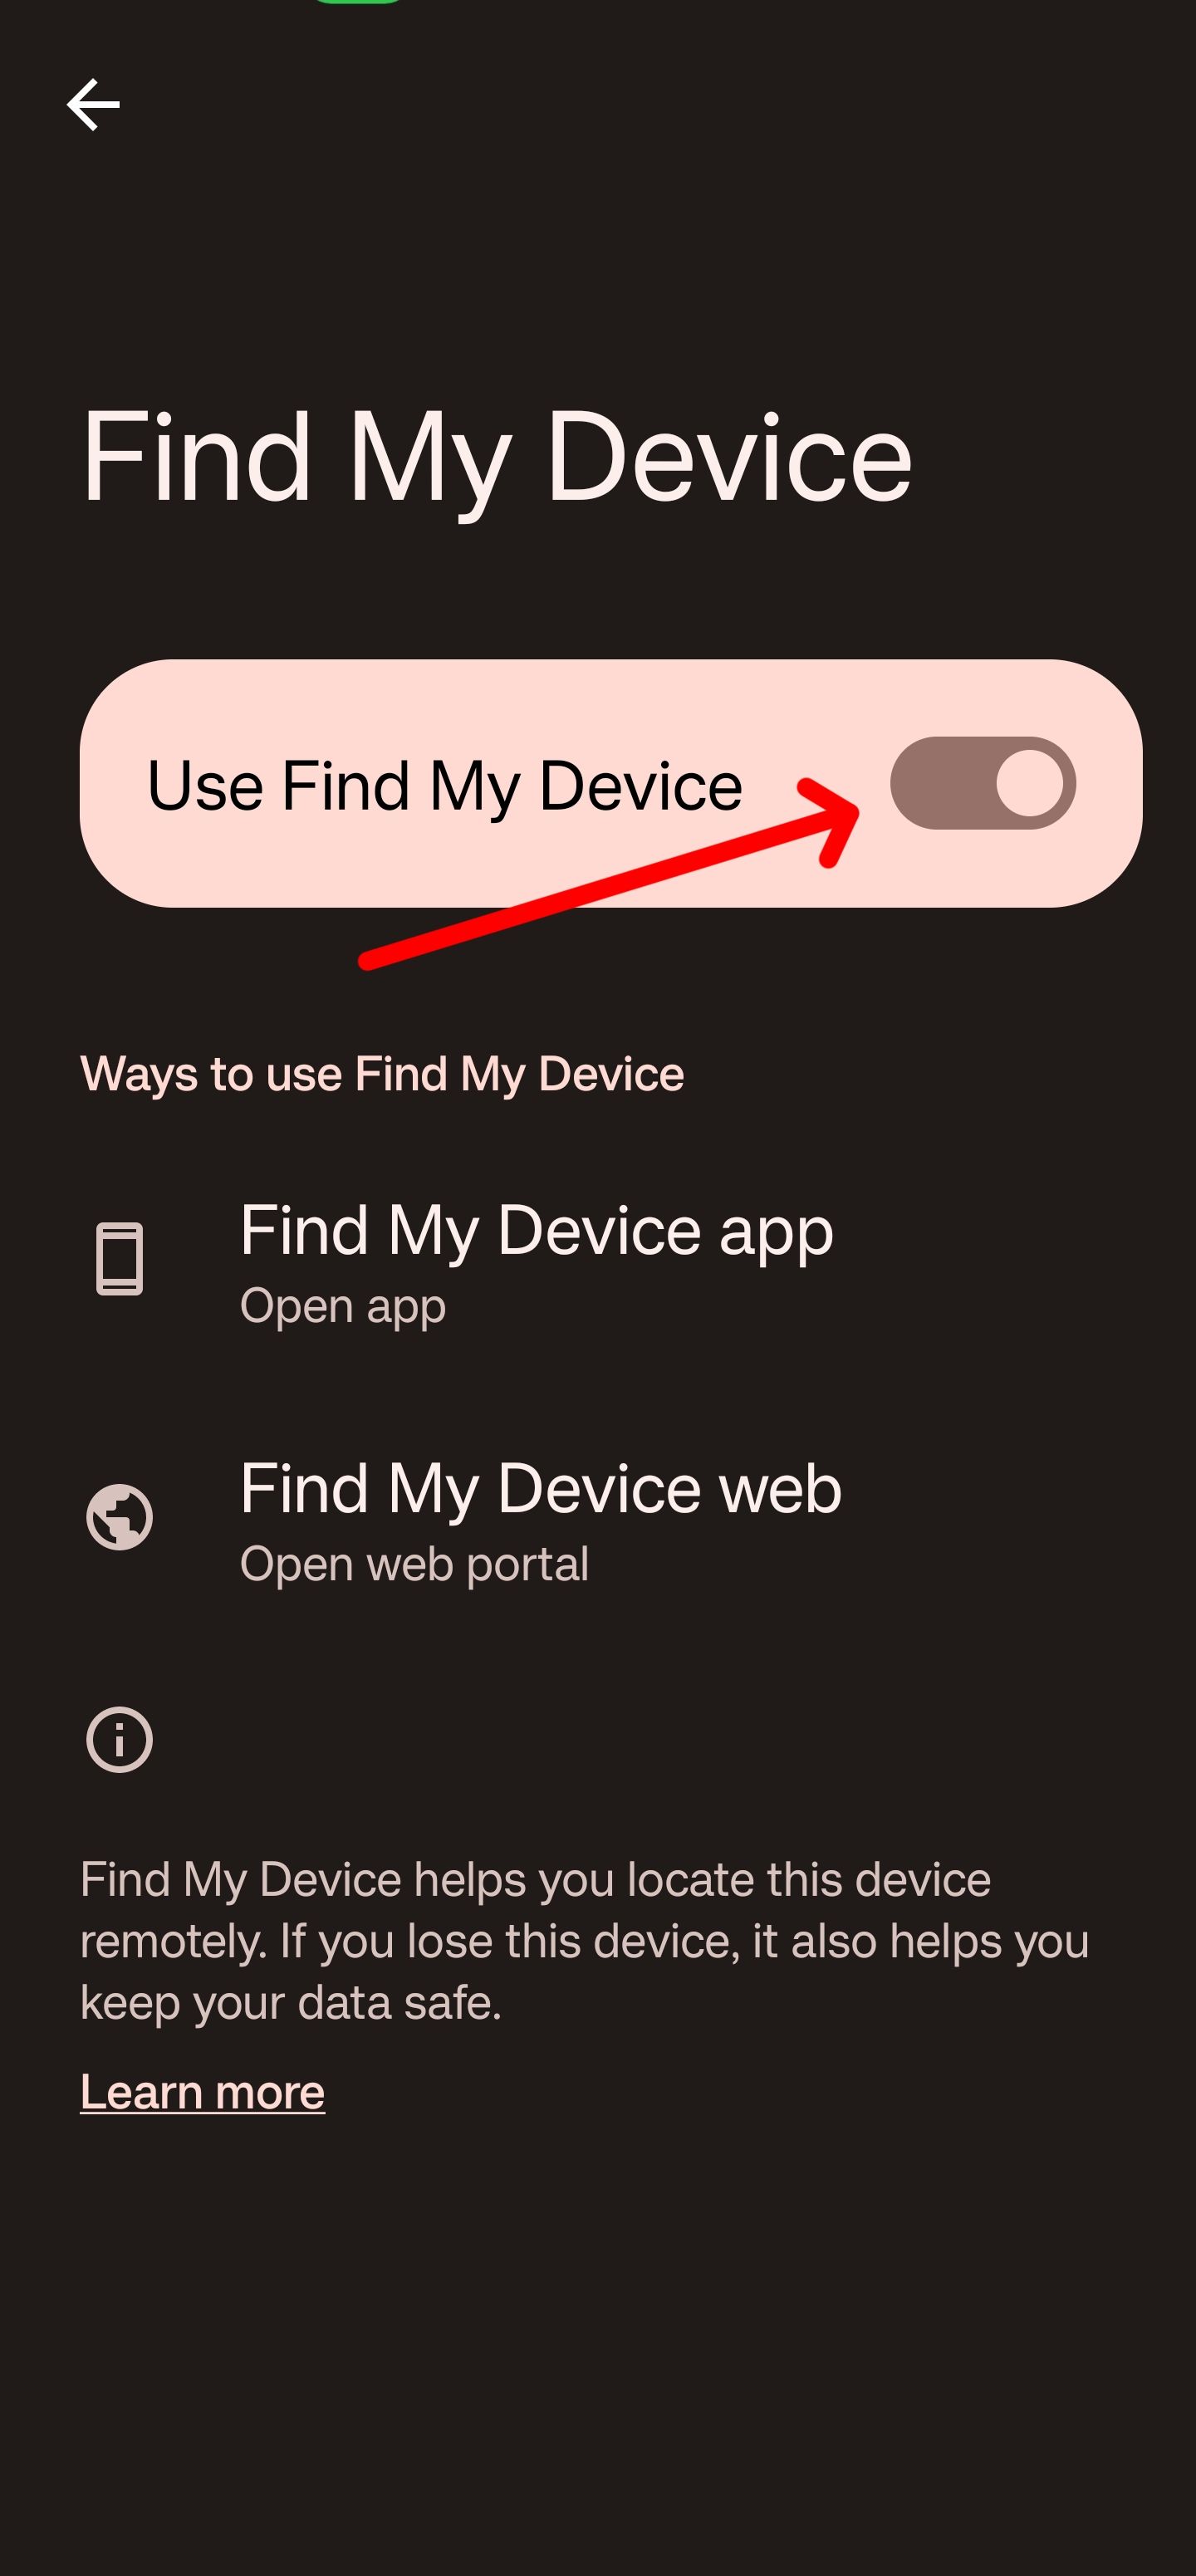 Touch the switch next to use find my device to turn the feature off.